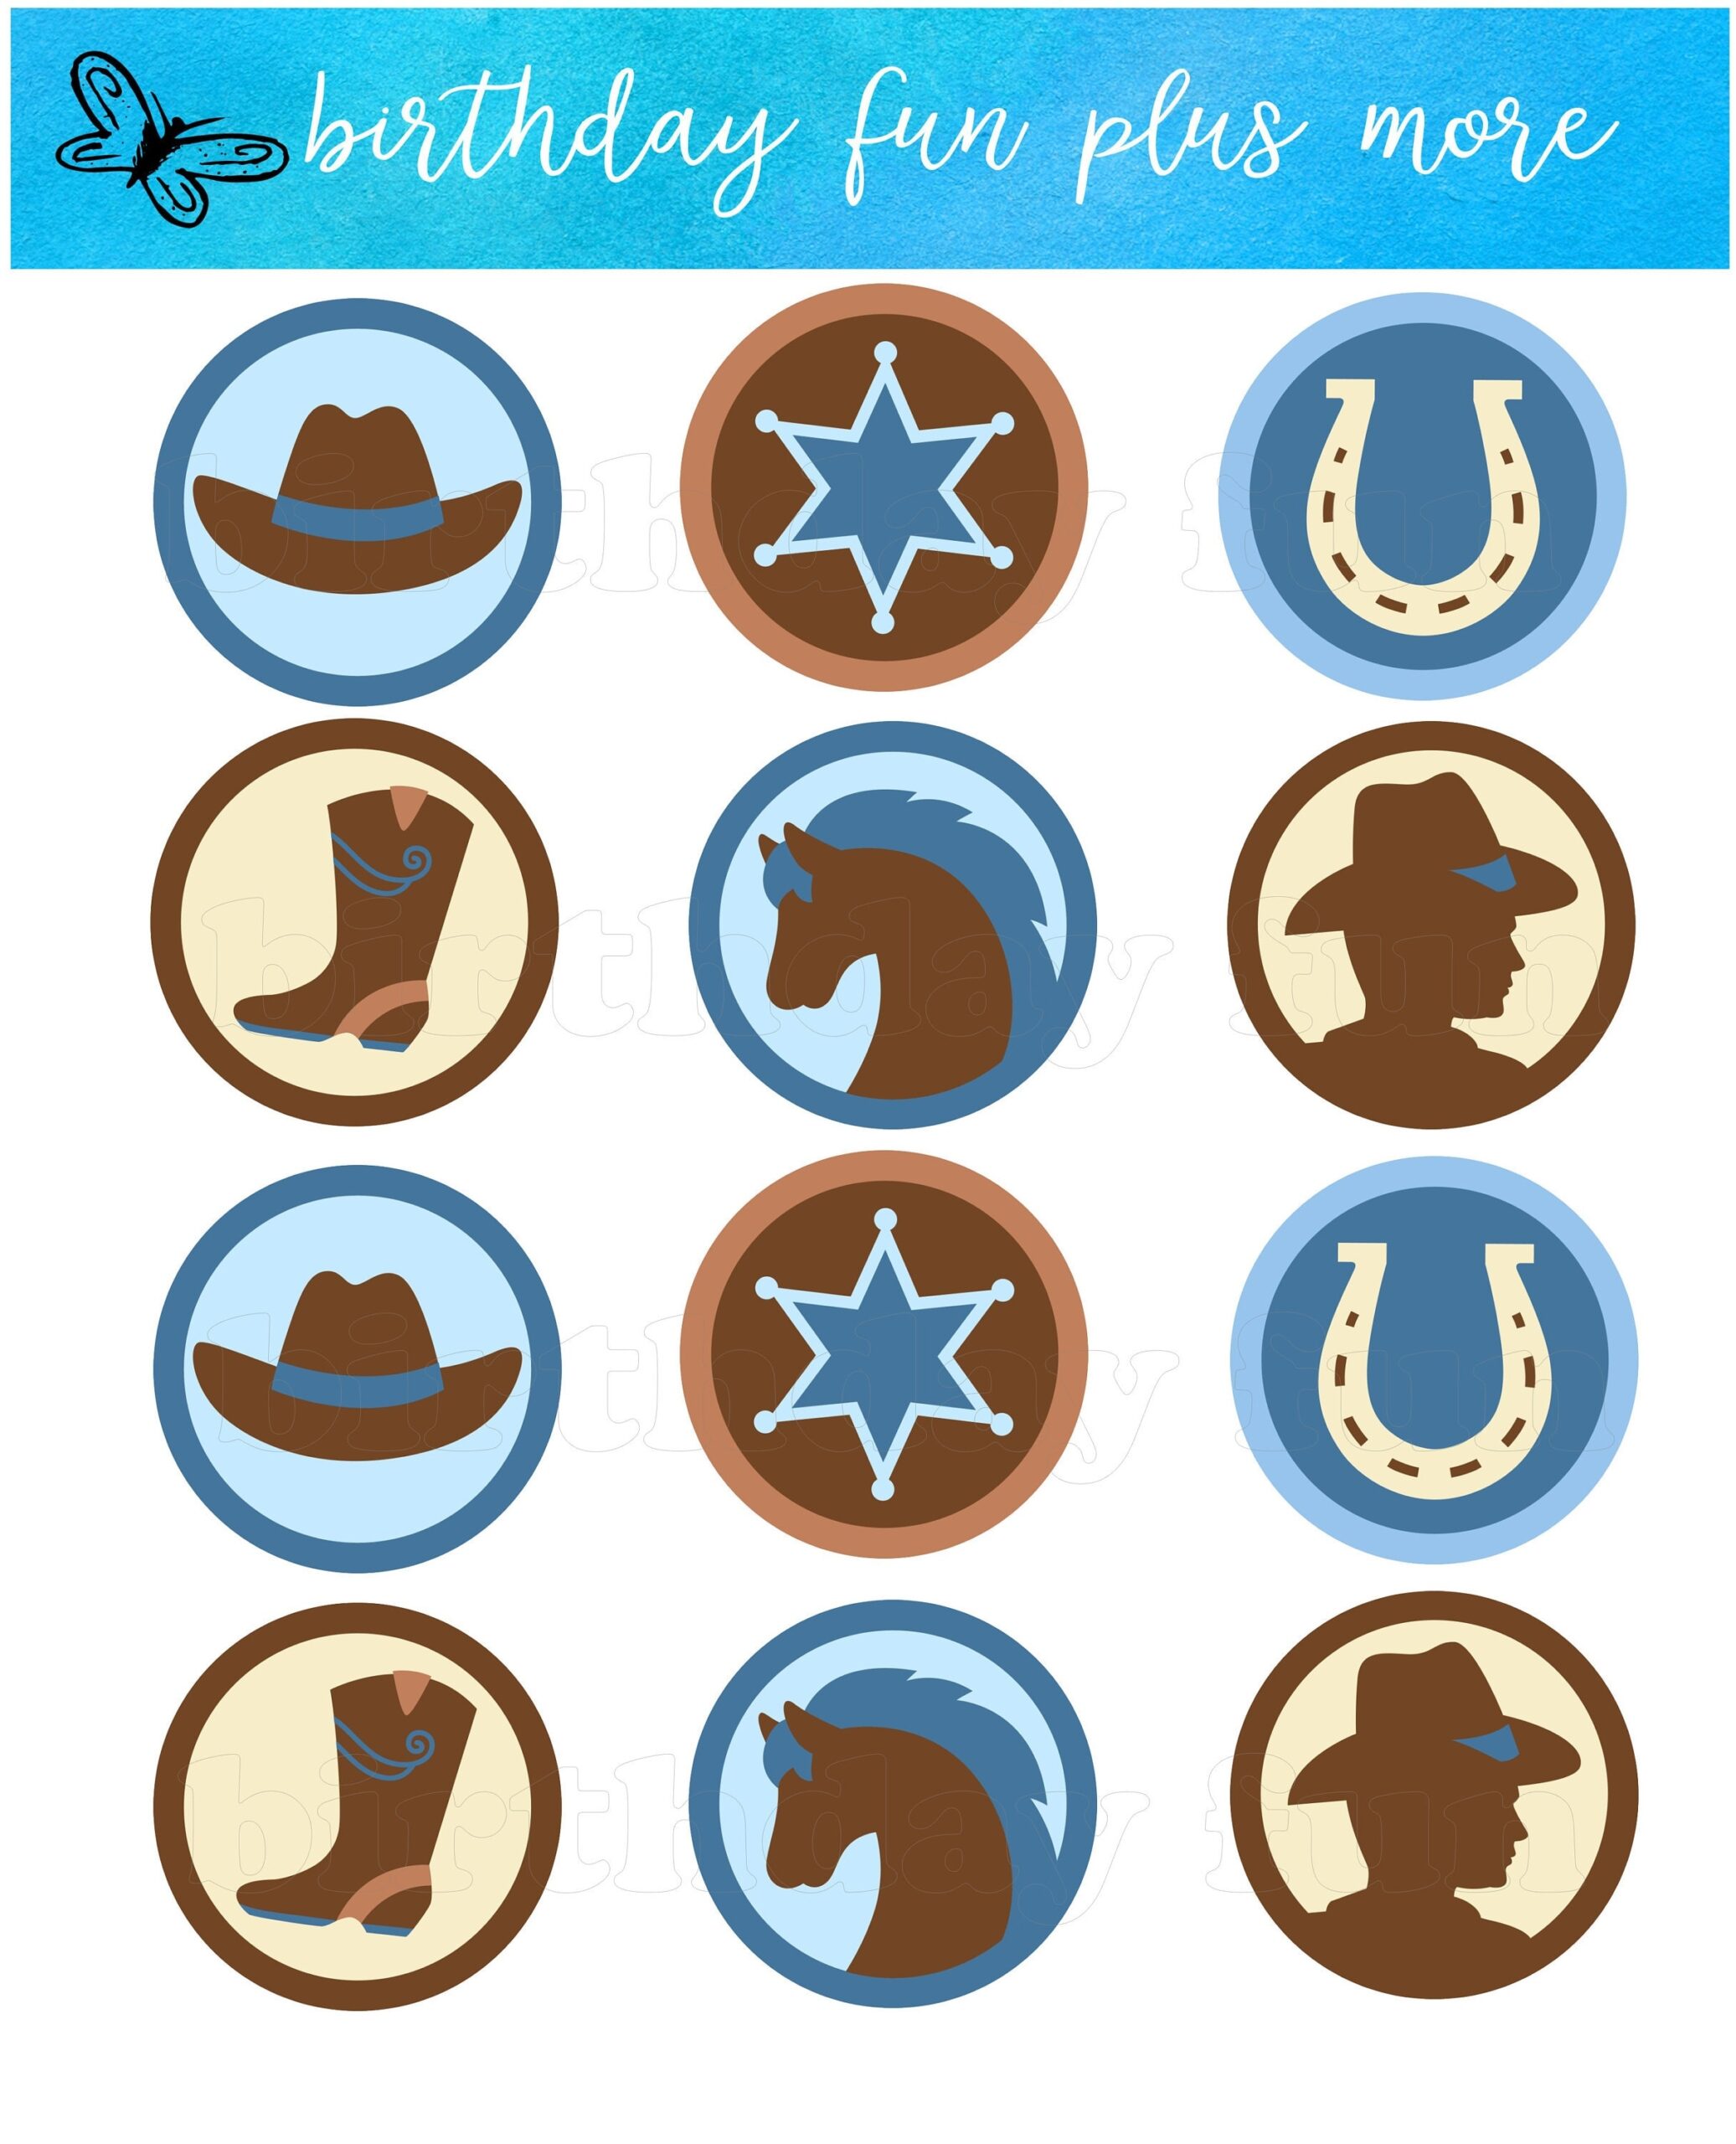 Cowboy Cupcake Toppers PRINTABLE Digital Cowboy Rounds Download Printable Cowboy Theme Cowboy Baby Shower Birthday Party Etsy